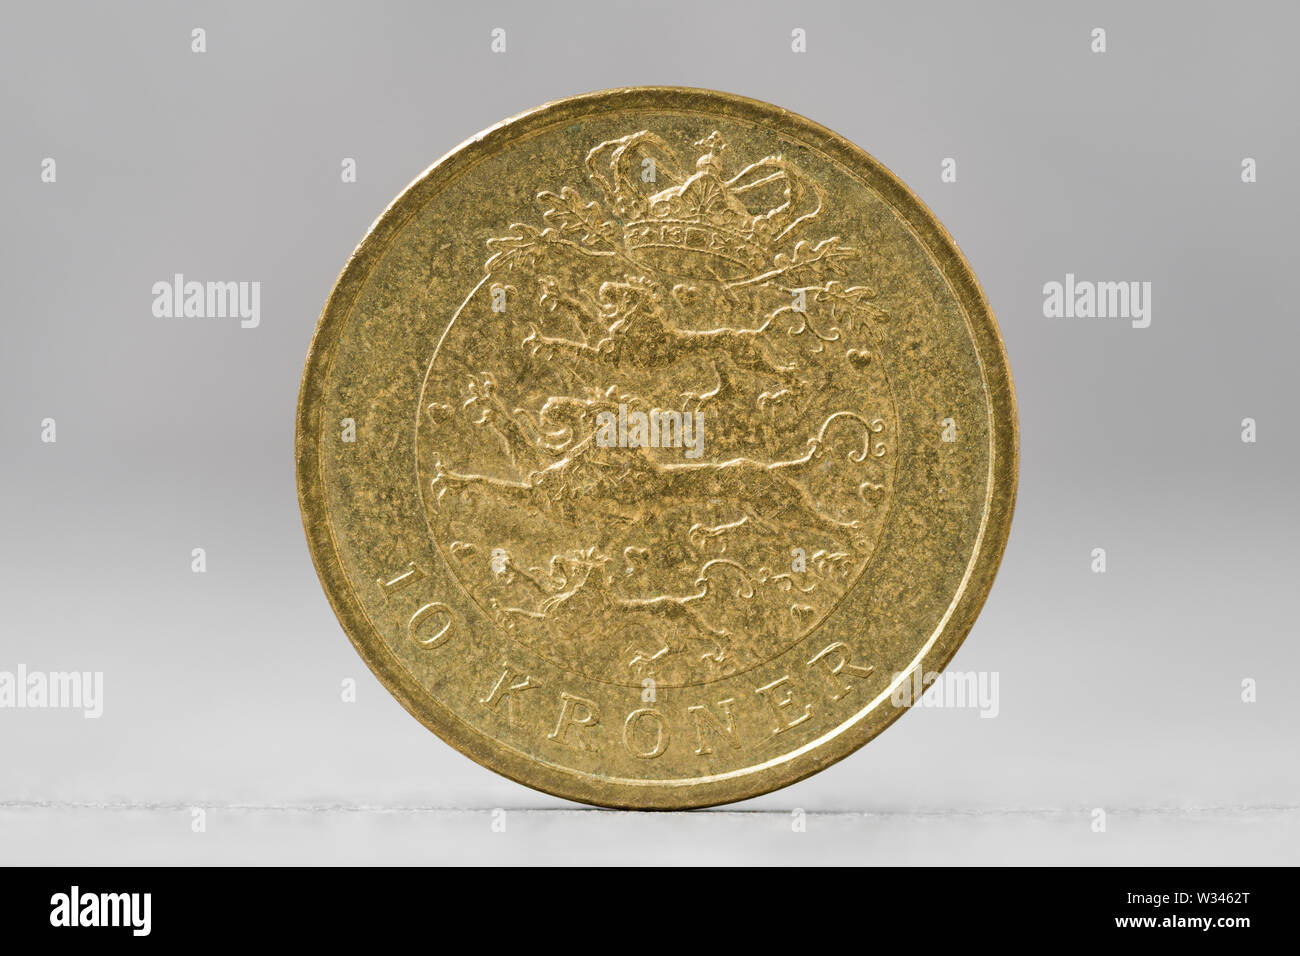 10 danish krone coin close-up view Stock Photo